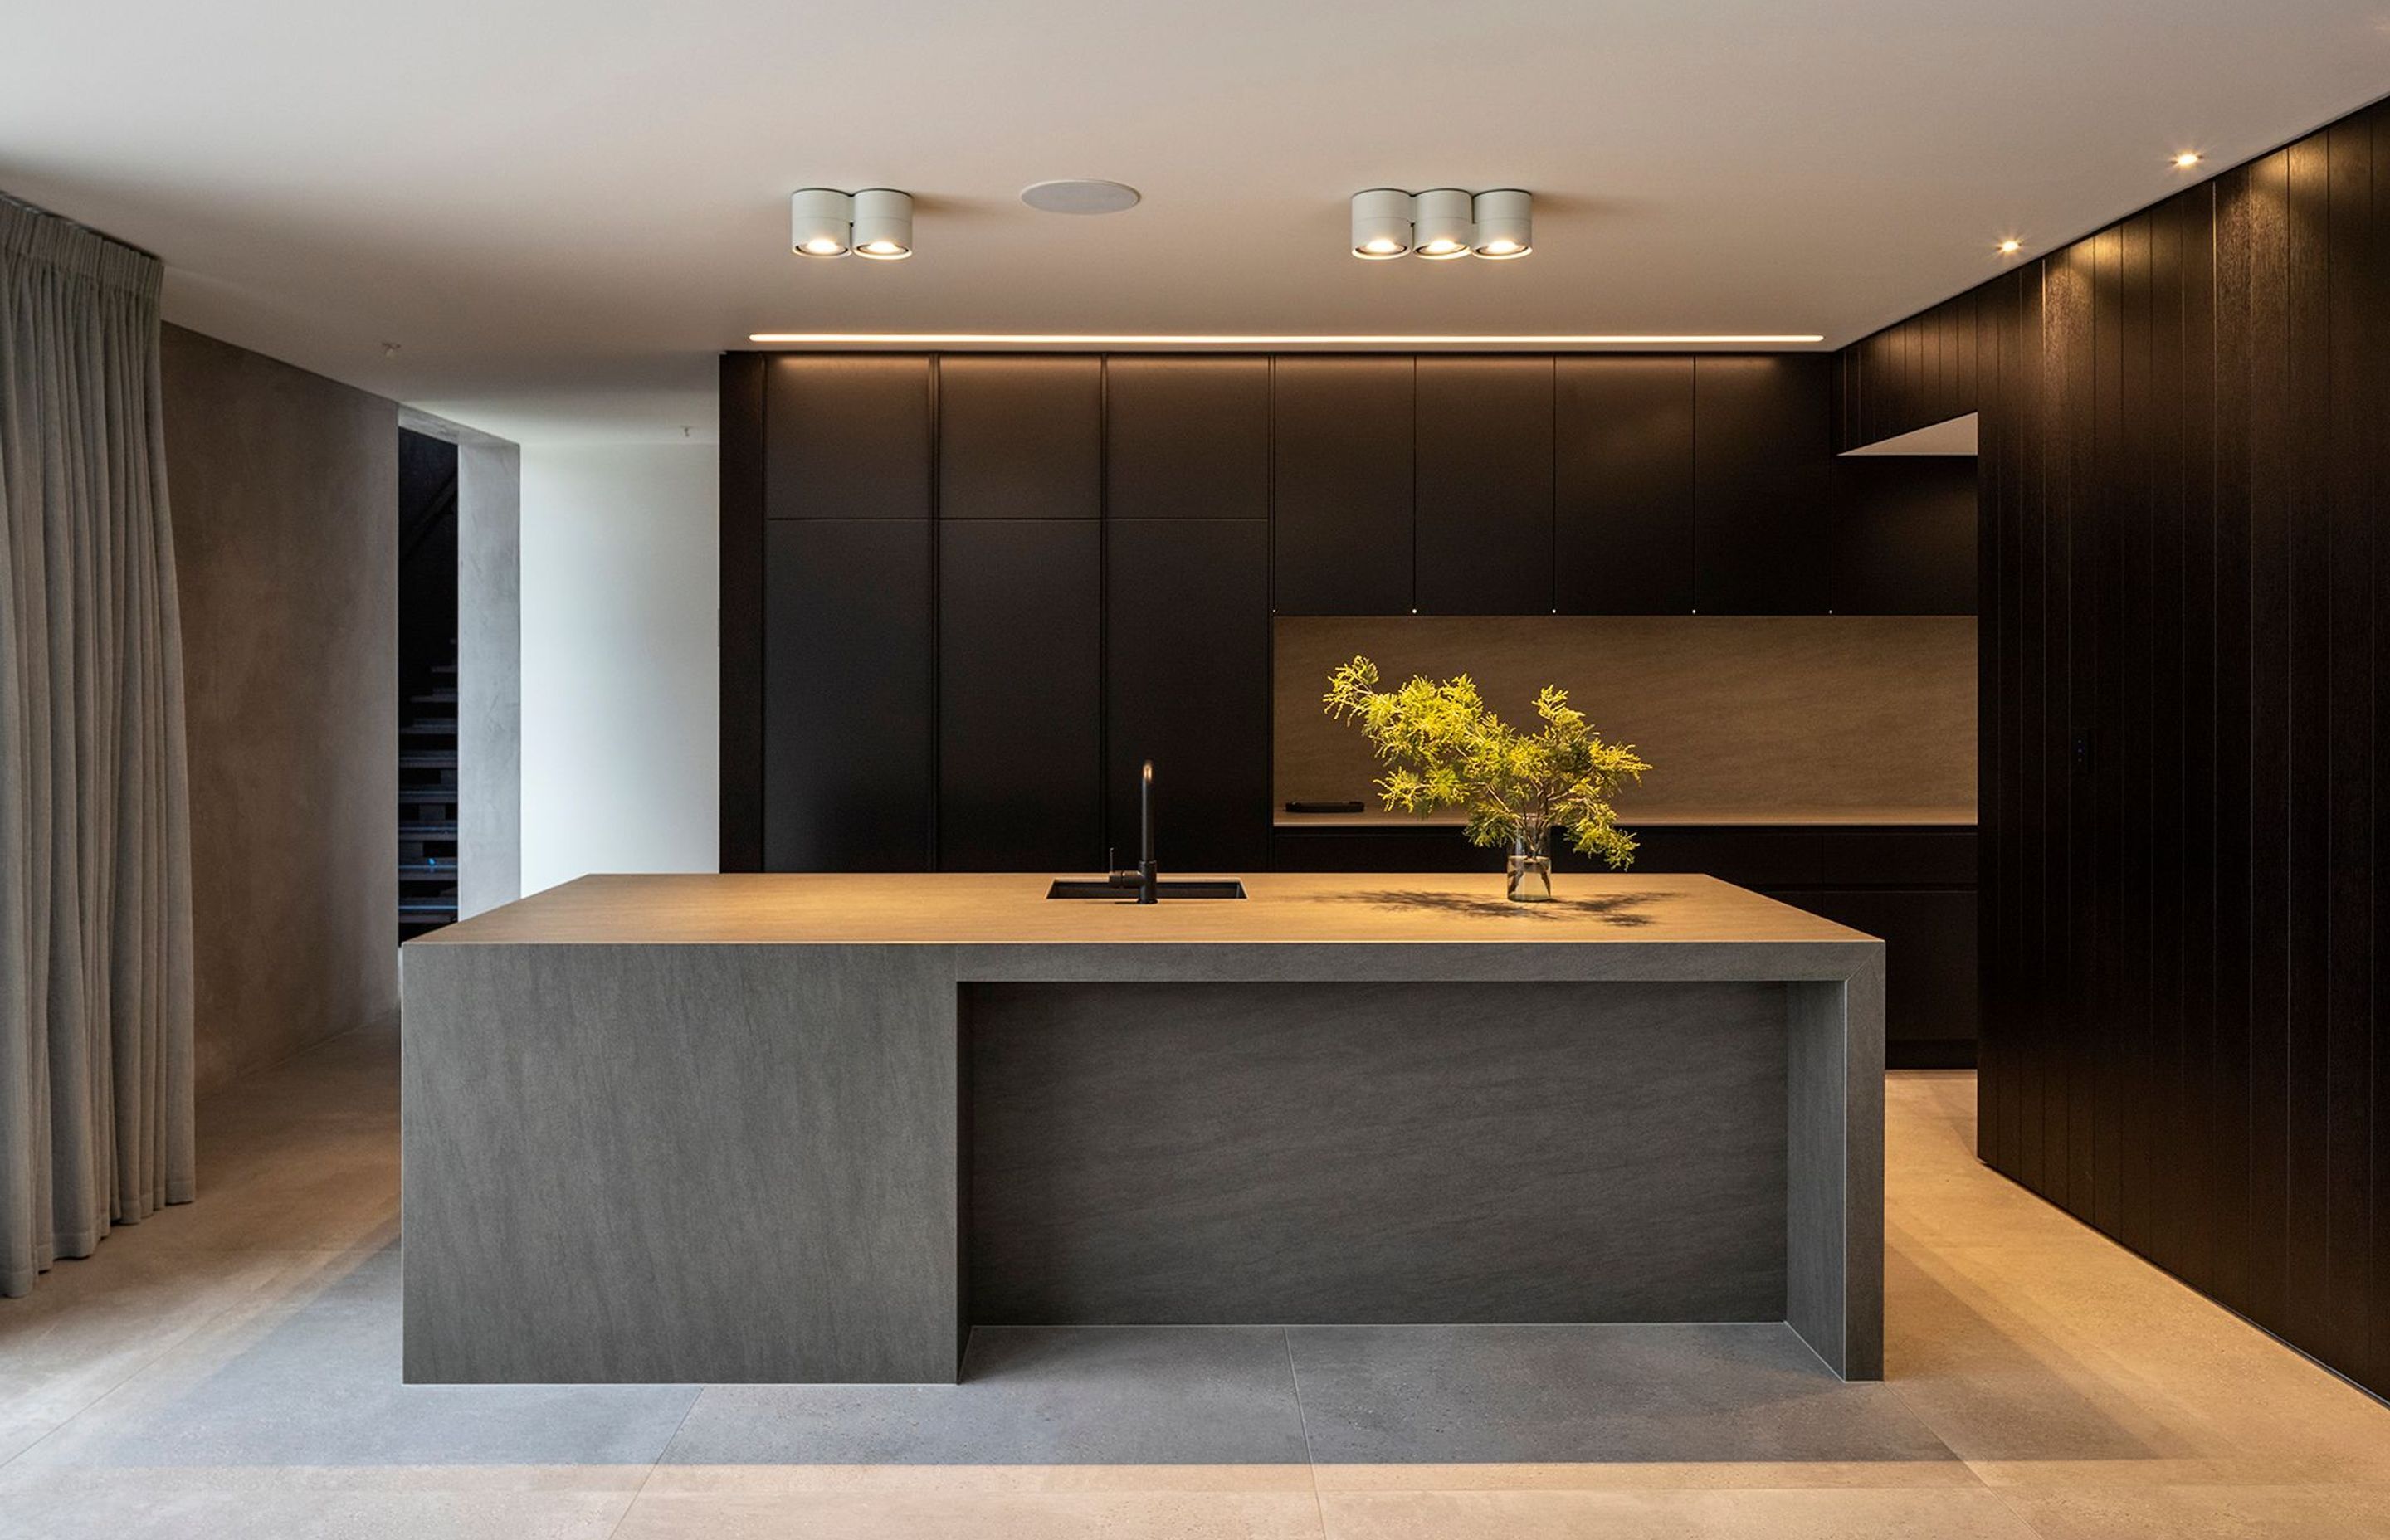 The kitchen is carefully detailed with the functional cooking area concealed in a separate annex, allowing the occupants to enjoy the primary space without clutter.